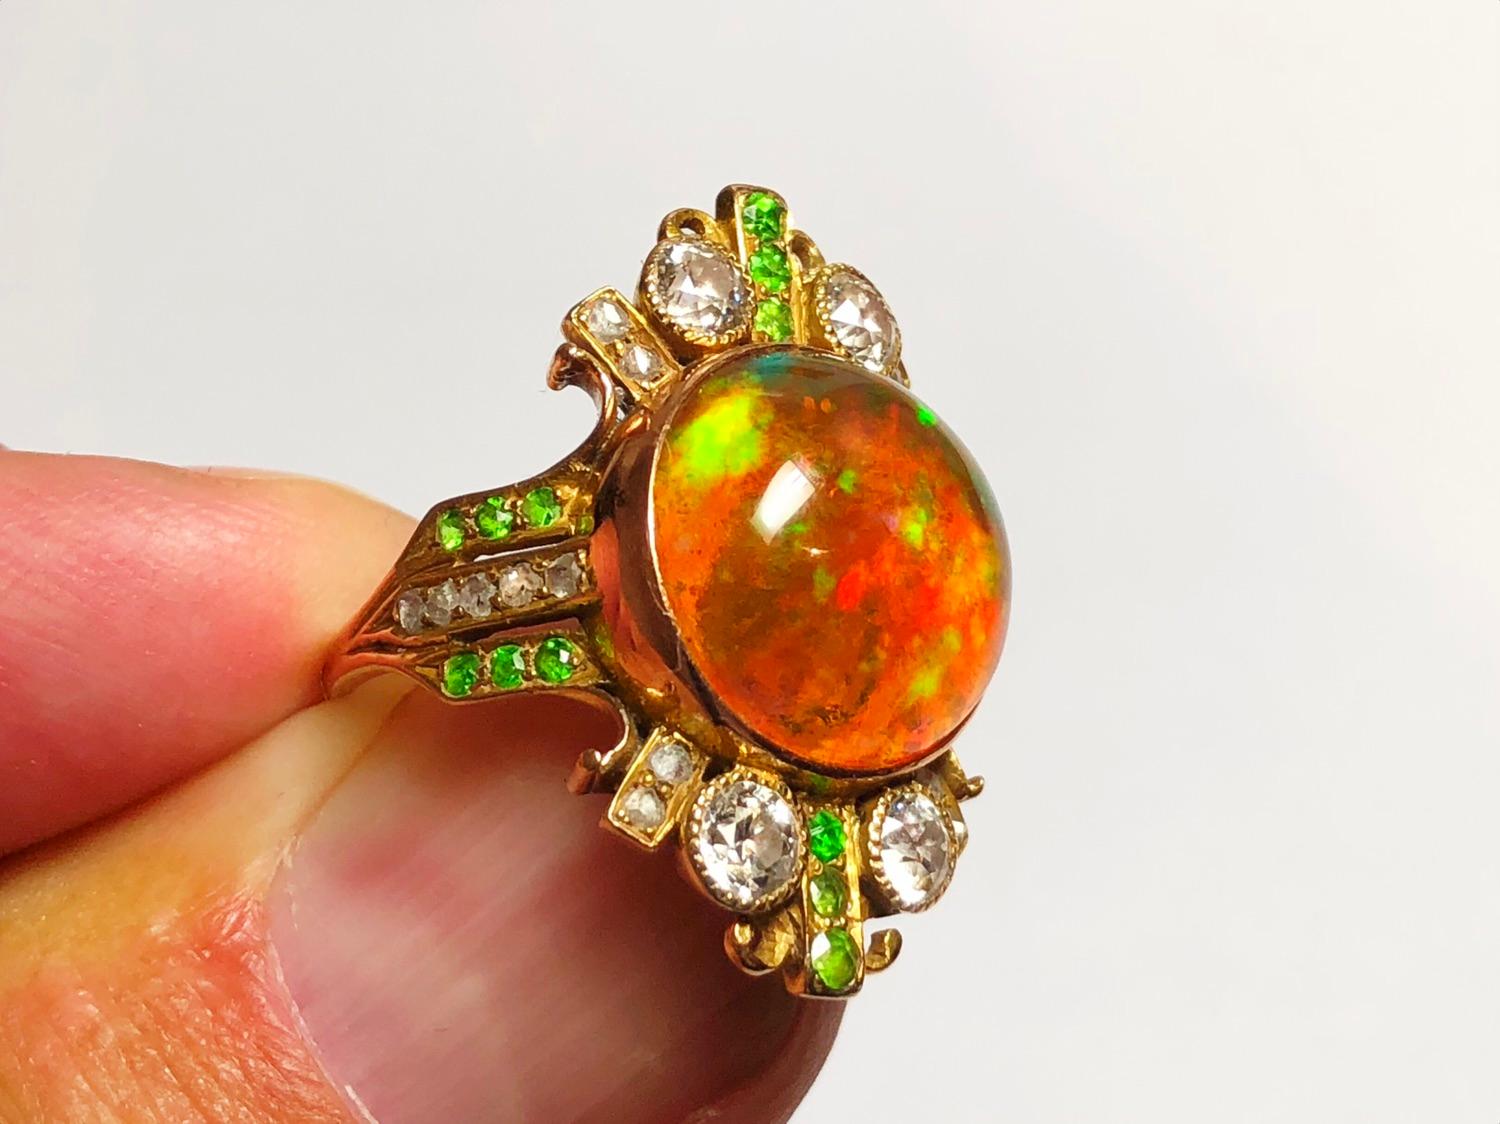 A fire opal and demantoid garnet ring, set with a central fire opal, with play of colour, in a decorative gold mount, with surrounding demantoid garnets and old-cut and rose-cut diamonds.

Opal diameter 13mm. Finger size O / USA 7